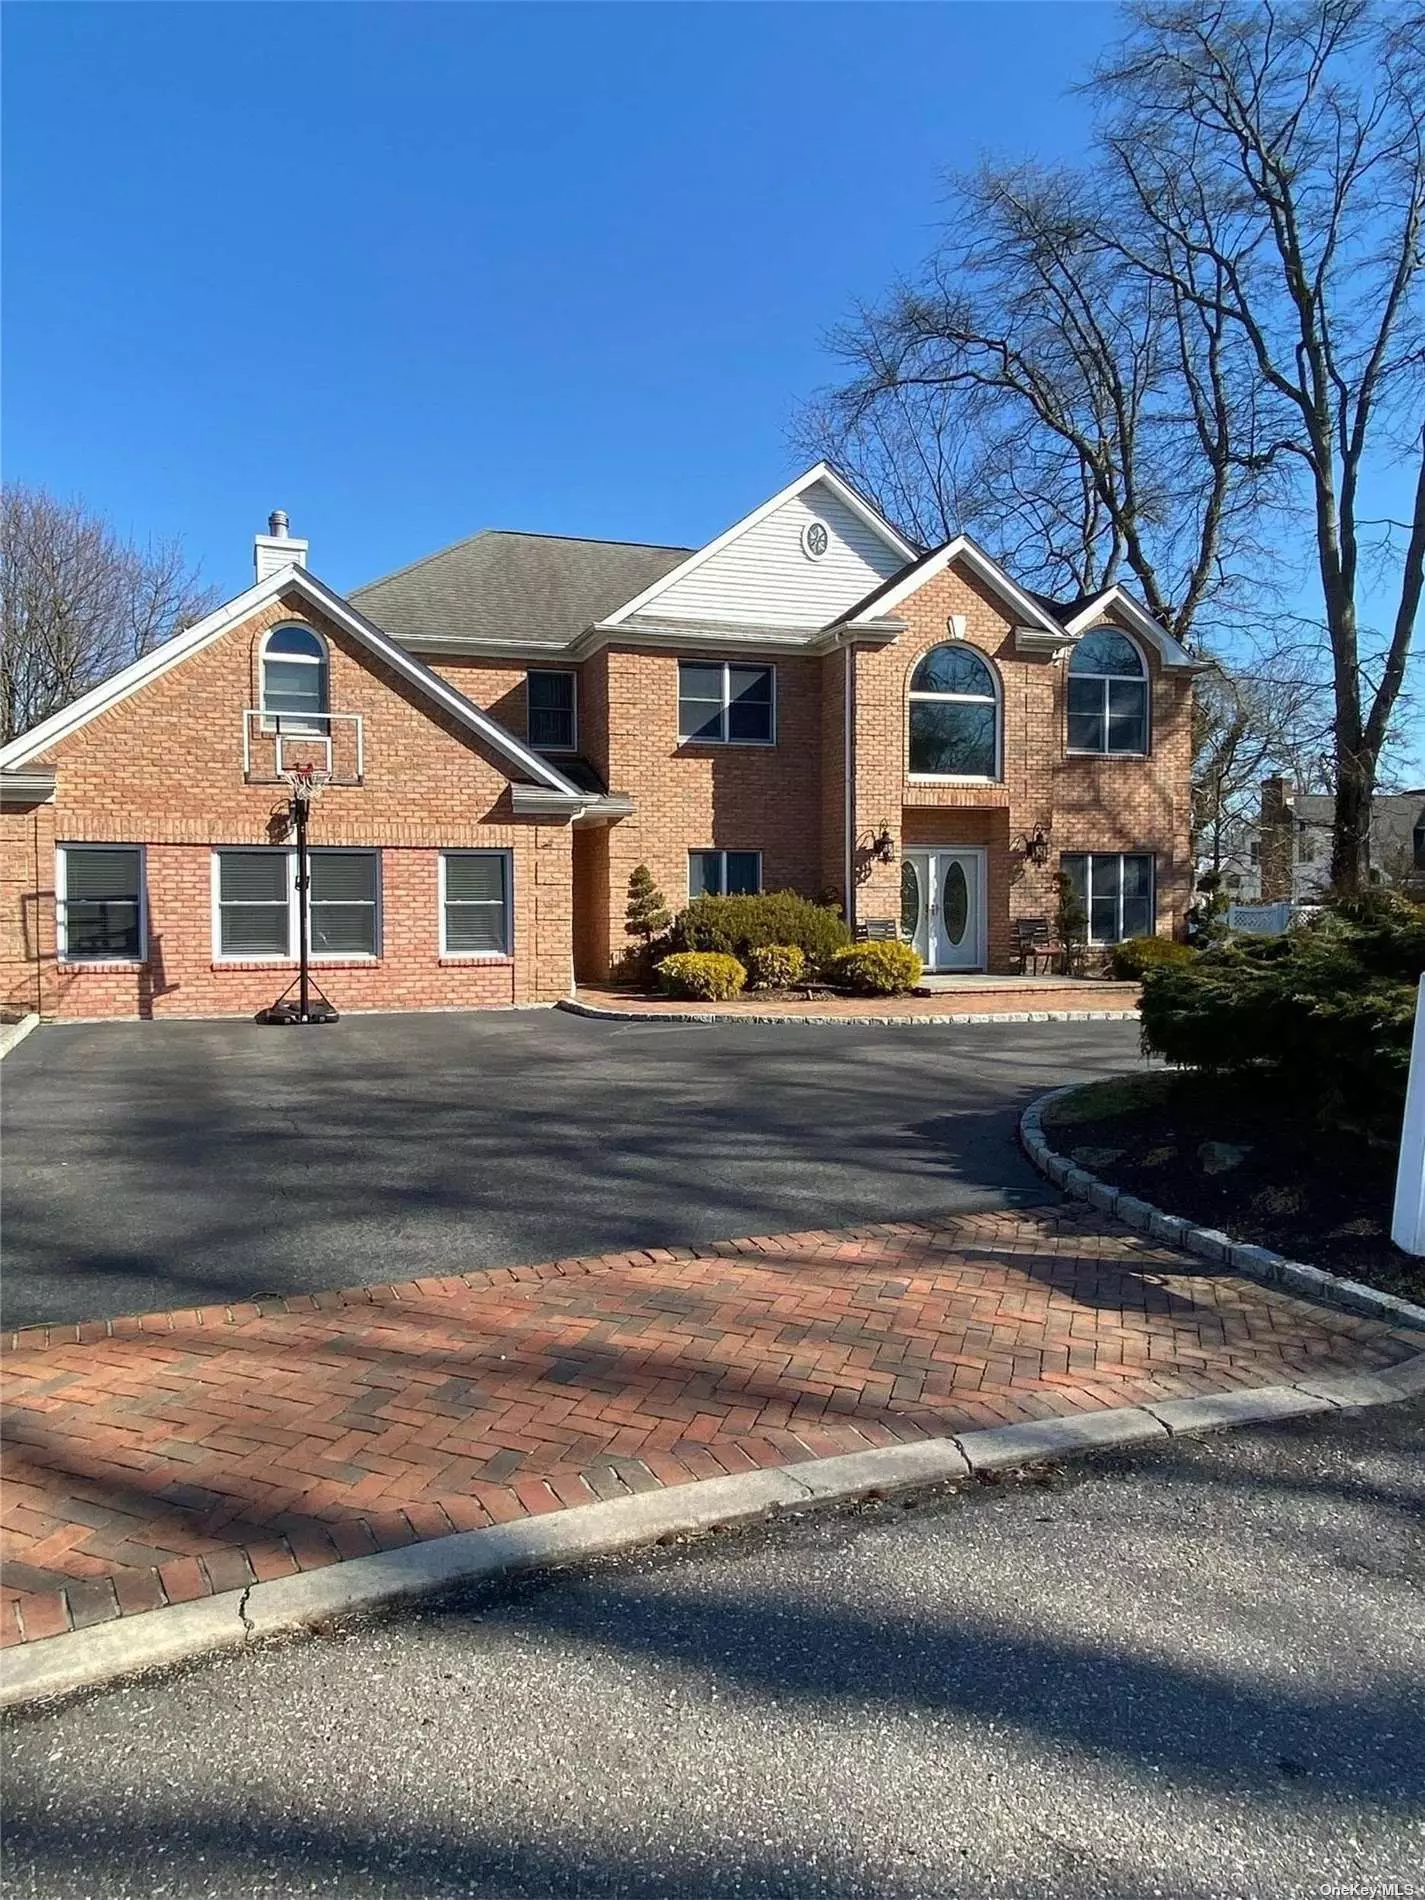 Stunning Colonial On Cul-De-Sac W/4Brs, 2.5 Bths, Master Br Suite W/Sep Dressing Room And Marble Bathroom, Eik W/Granite & Ss Appls, Oak Hardwood Flrs W/Wood Inlay And Herringbone Design, Fdr, Lr W/Fpl. All Applicants Thru NTN. One month broker fee, first month rent, one month security due at lease signing.